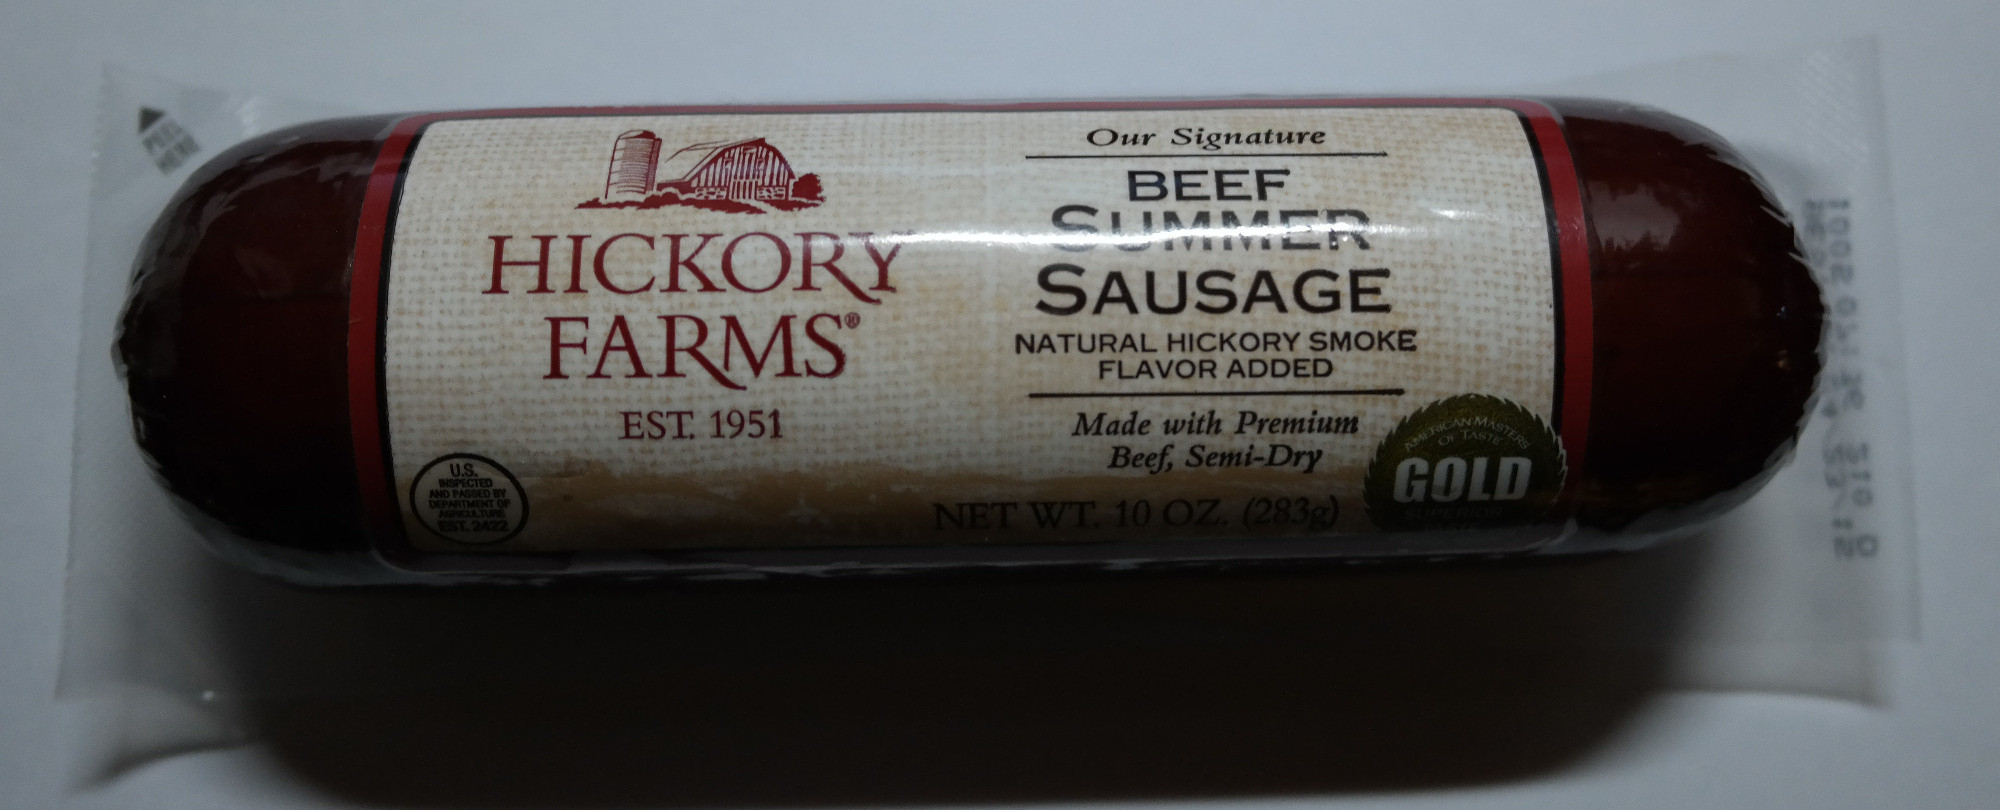 Hickory Farms Beef Summer Sausage
 Hickory Farms Our Signature Beef Summer Sausage Natural